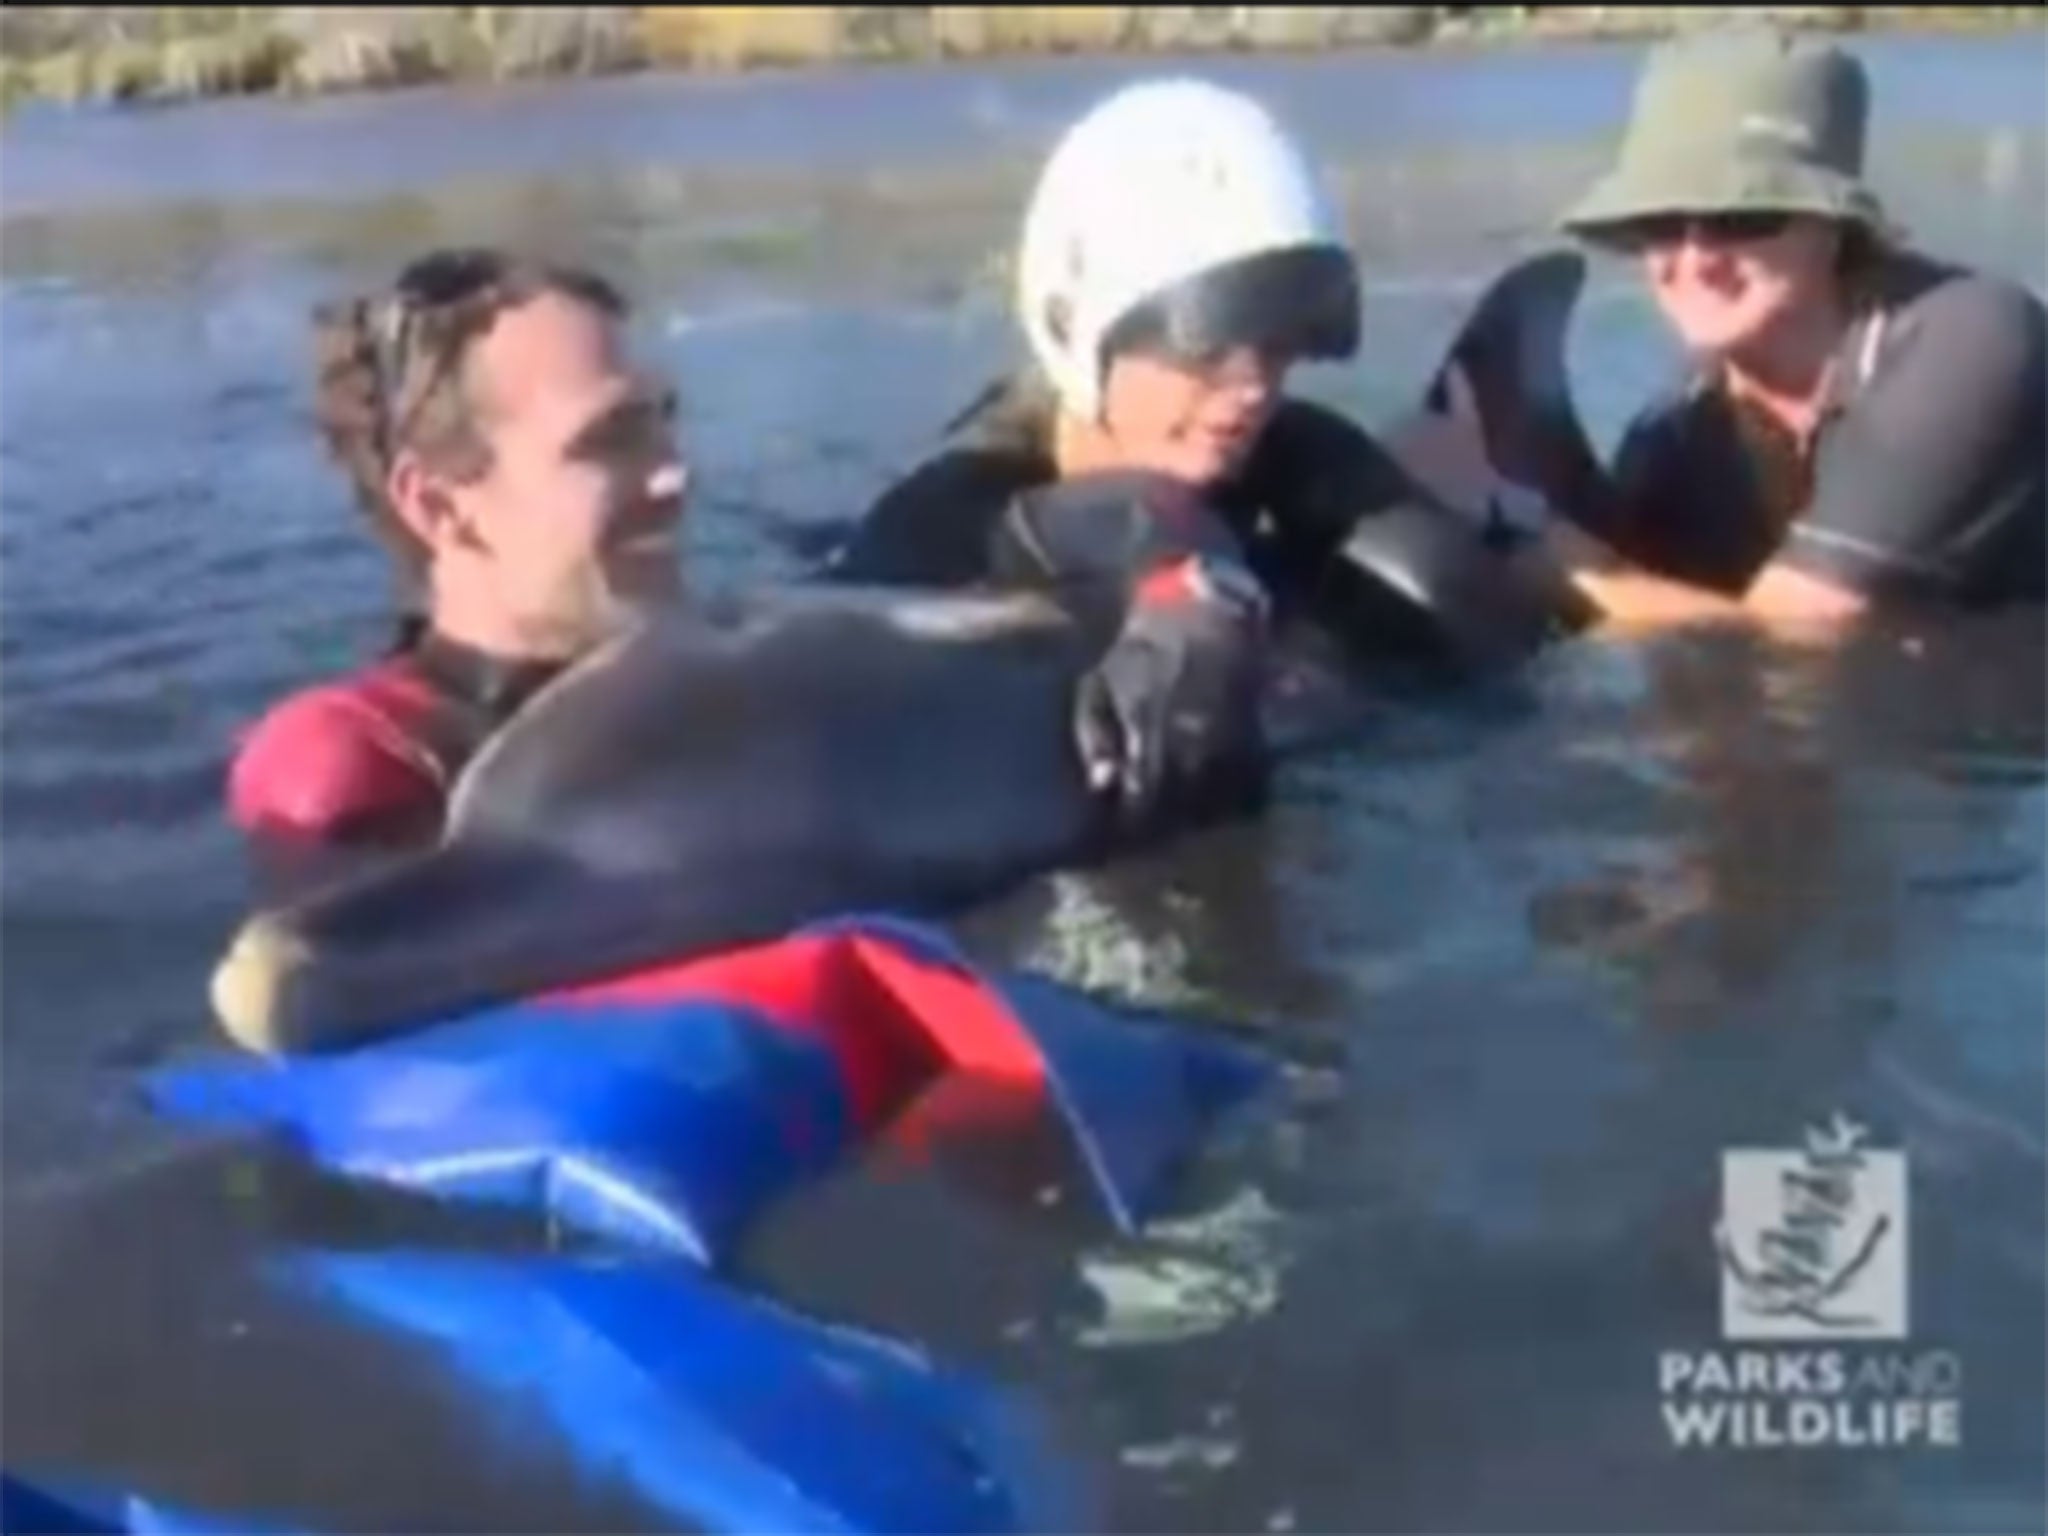 It took ten people to lift the dolphin into